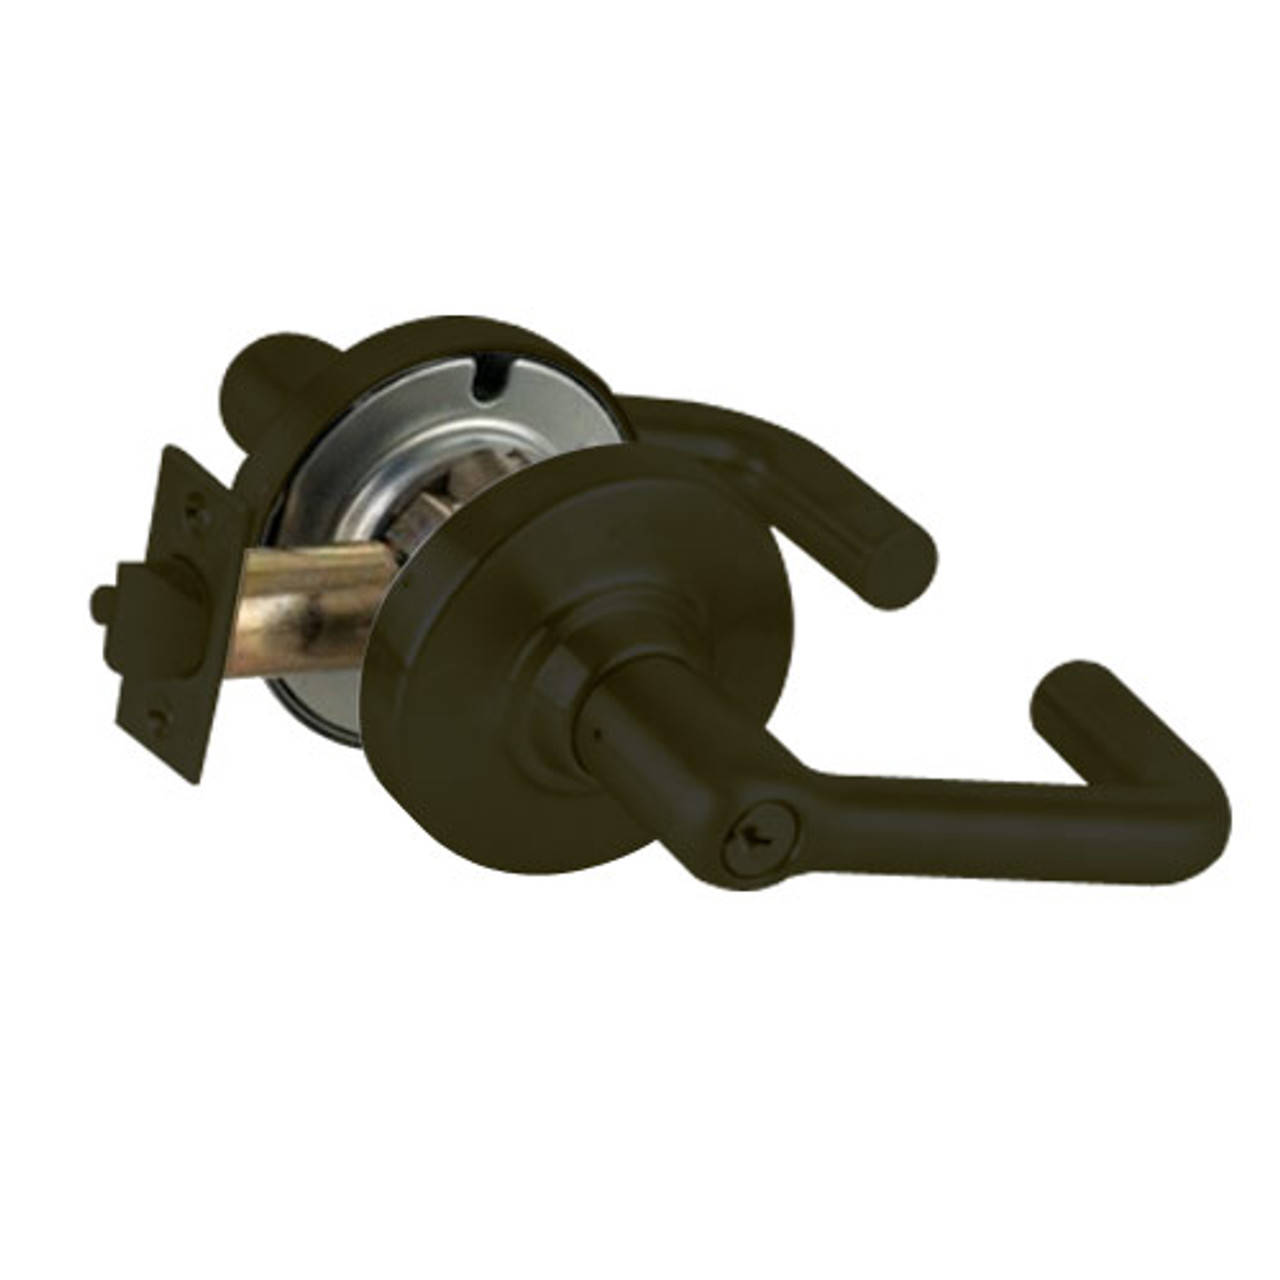 ND60PD-TLR-613 Schlage Tubular Cylindrical Lock in Oil Rubbed Bronze